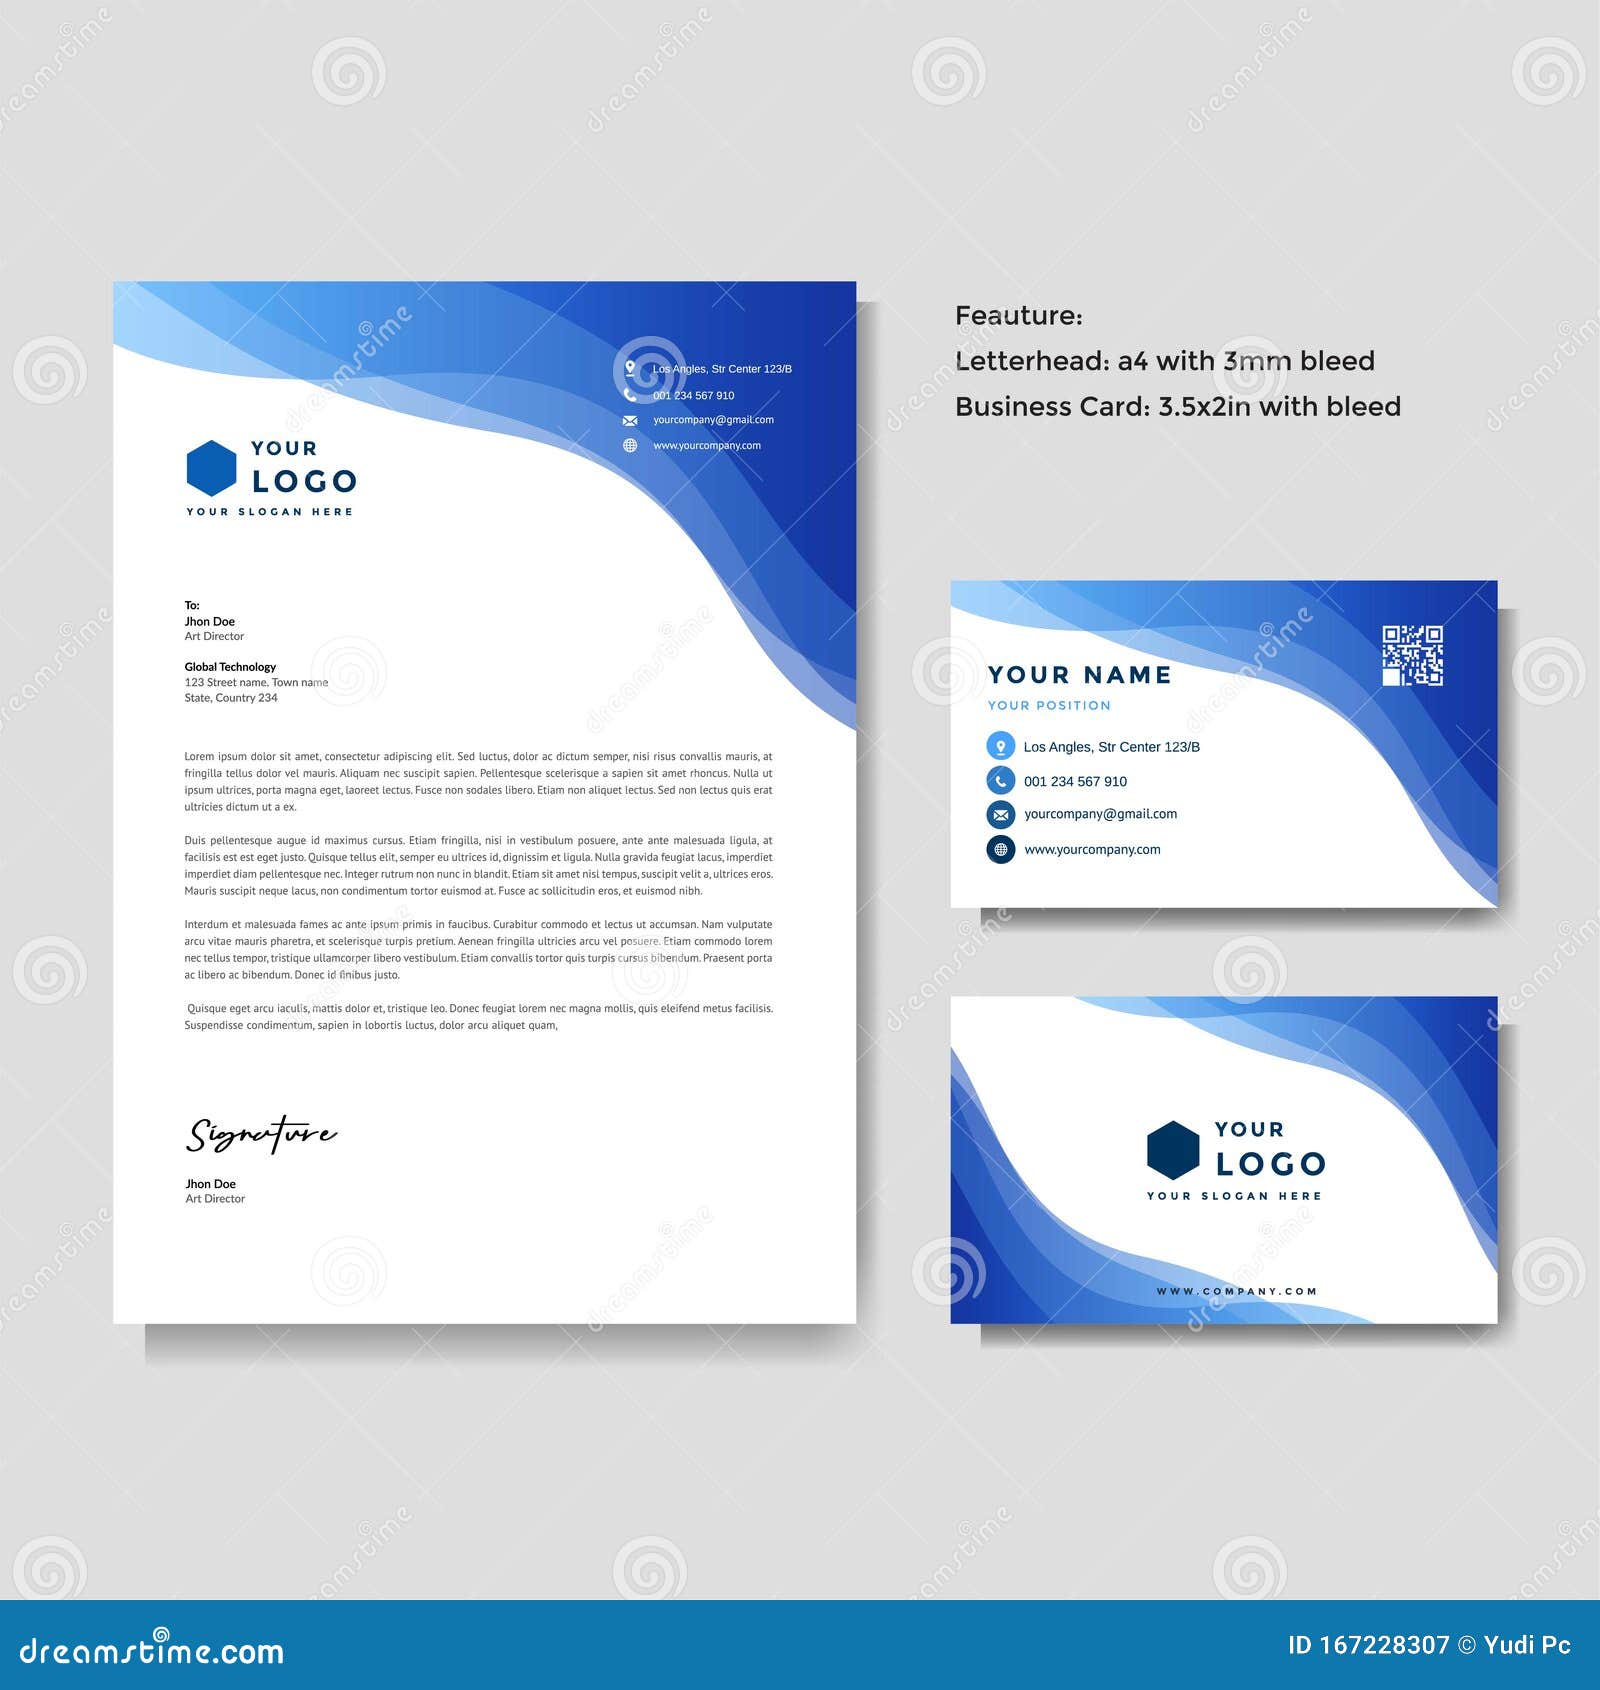 Professional Creative Letterhead And Business Card Vector Stock Vector Illustration Of Folder Business 167228307